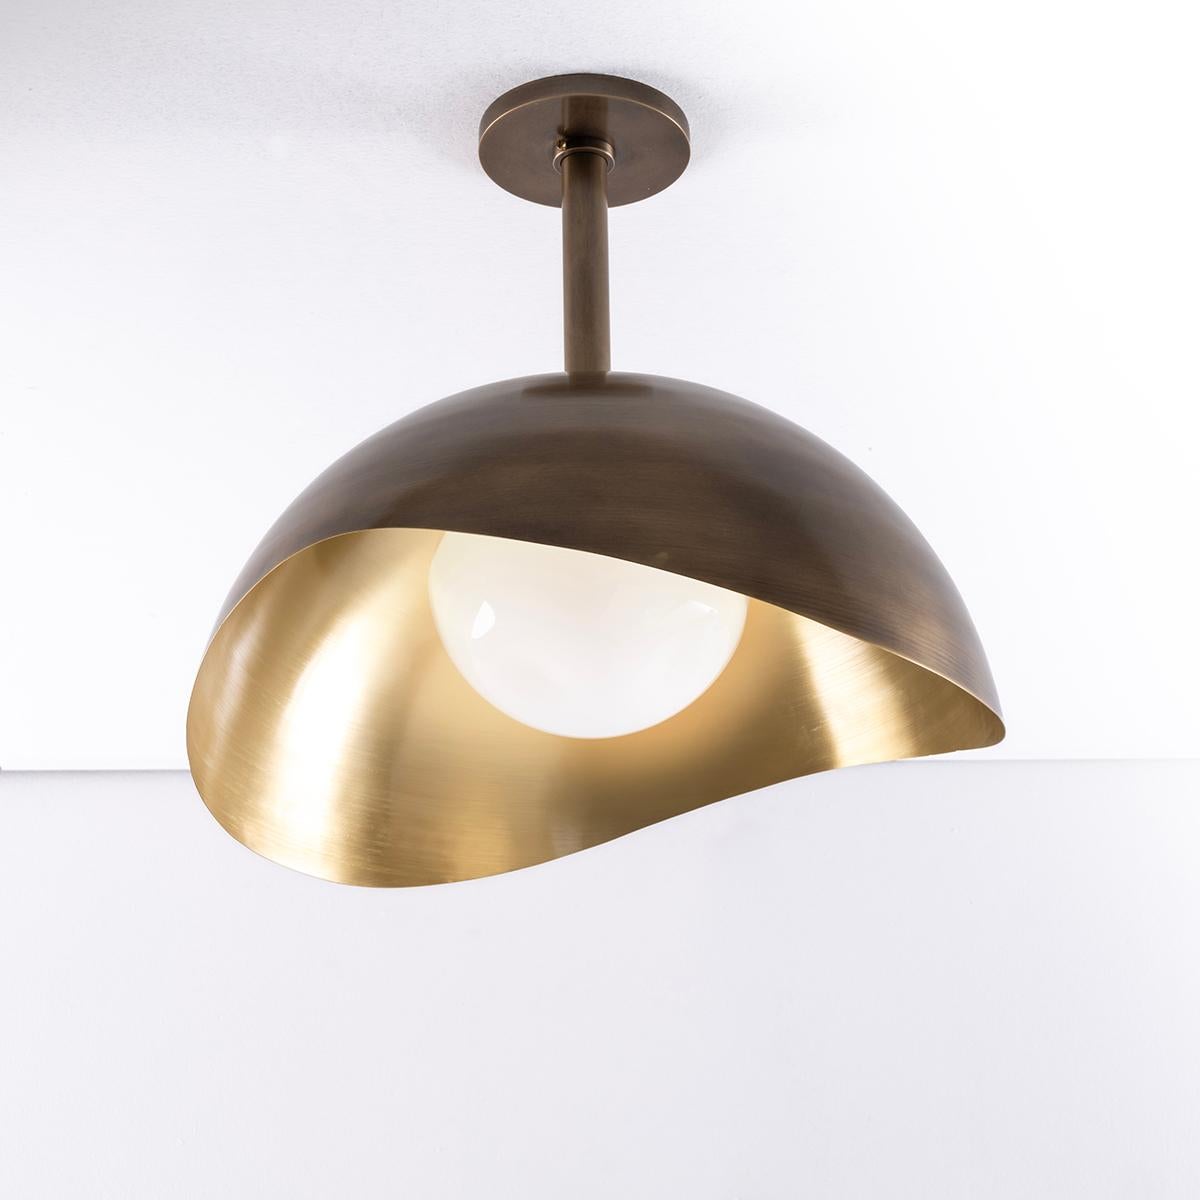 The Perla Grande features an organic brass or copper shell nestling our sfera glass handblown in Murano. Shown in three different finish combinations. Starting from $4,500.00. See our Perla flushmount and wall light for the smaller